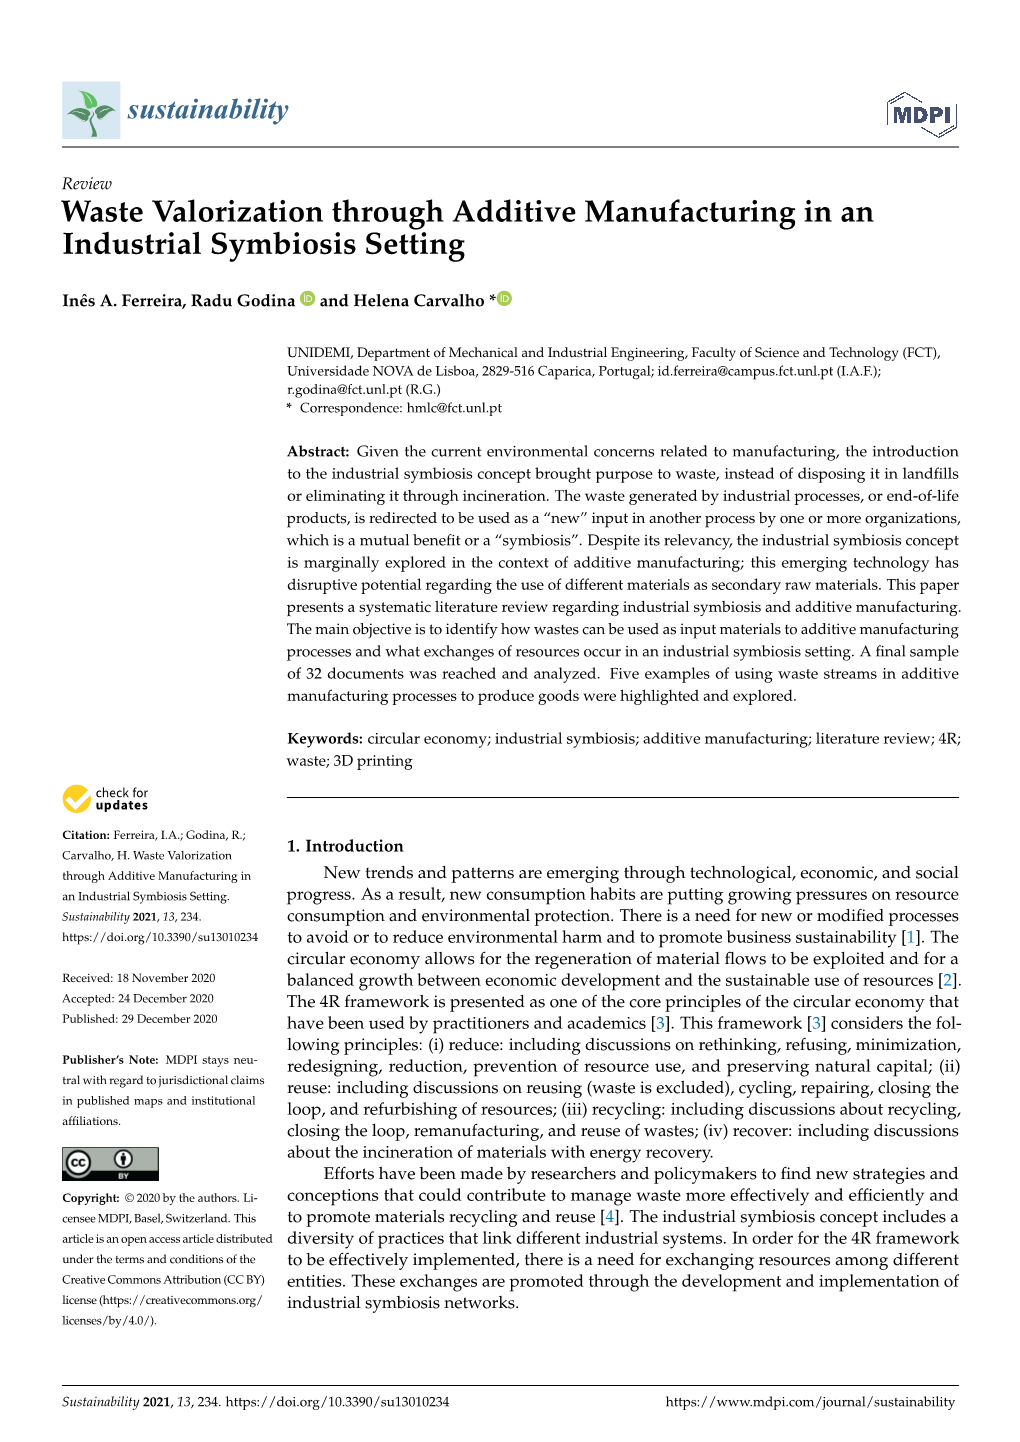 Waste Valorization Through Additive Manufacturing in an Industrial Symbiosis Setting